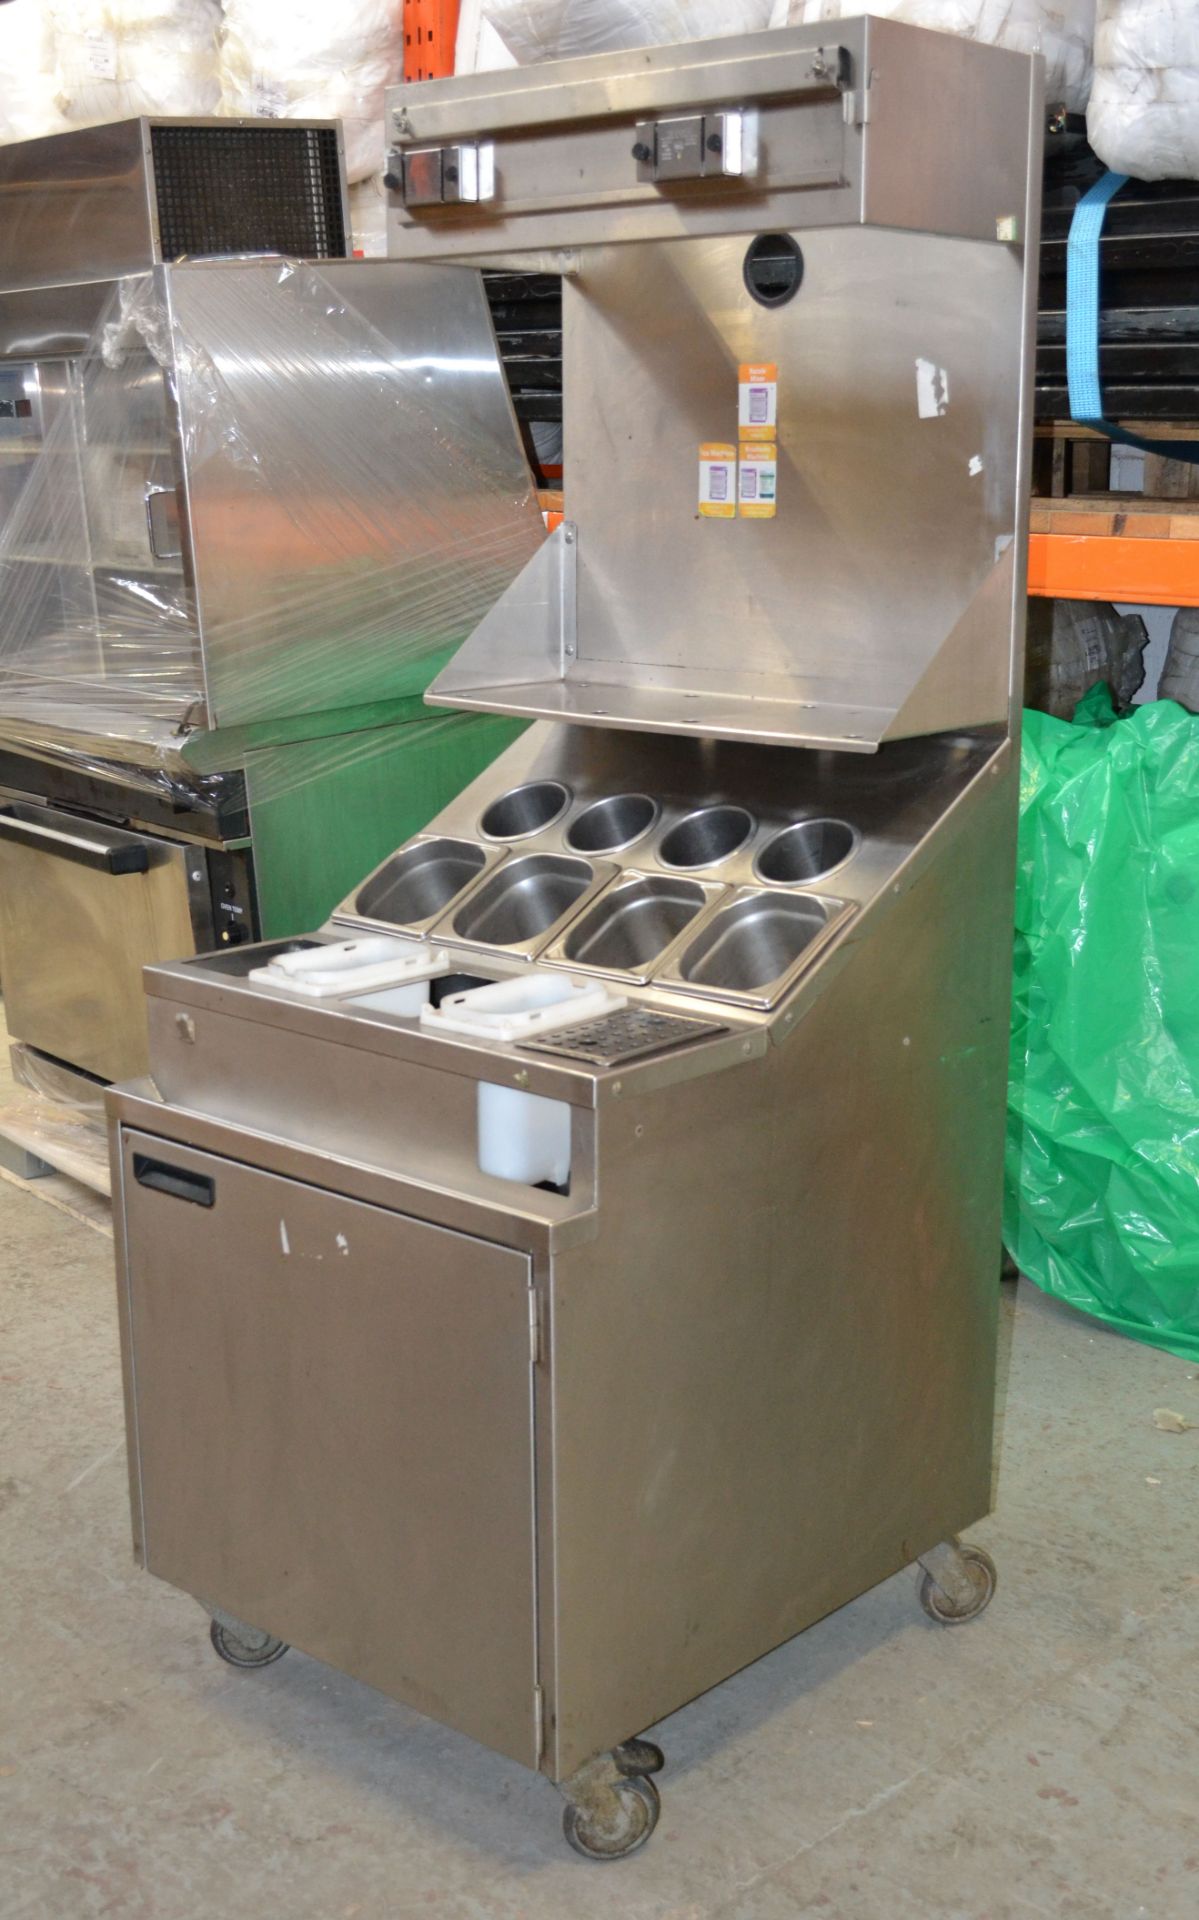 1 x Large Catering Serving / Topping Station - Ex-KFC- 67(w) x 76(d) x 178(h) cm - Ref: HM229 - - Image 14 of 14